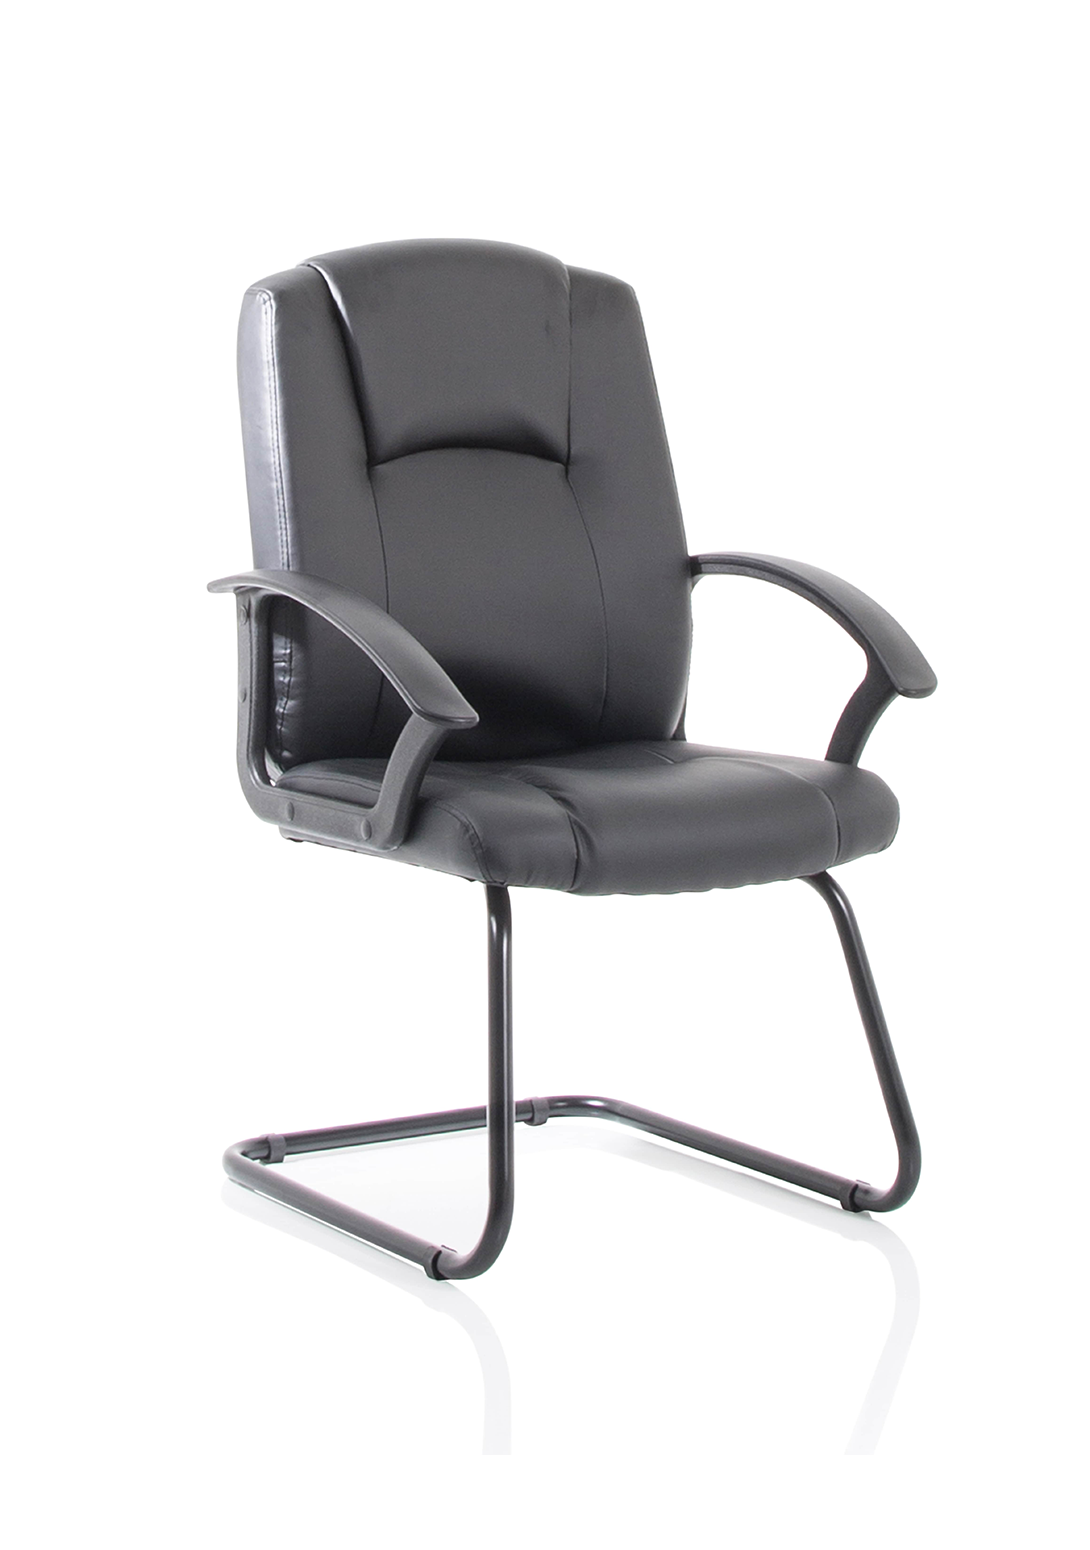 Bella Cantilever Chair